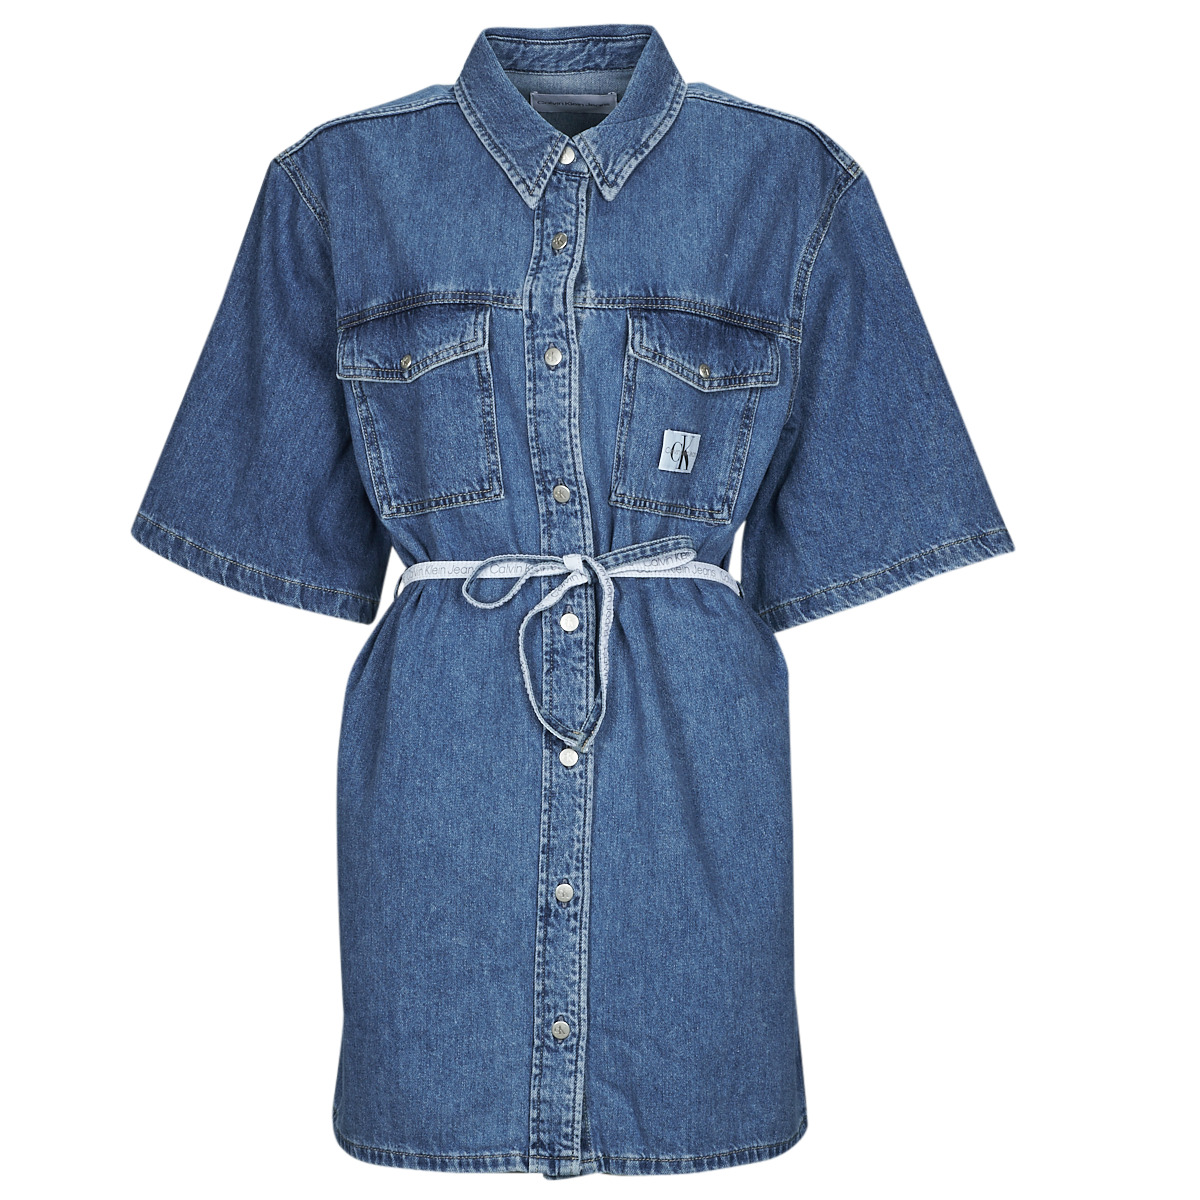 Calvin Klein SHIRT ! - DRESS NET Dresses Clothing delivery UTILITY Women Free Jean - Spartoo | Short Jeans BELTED